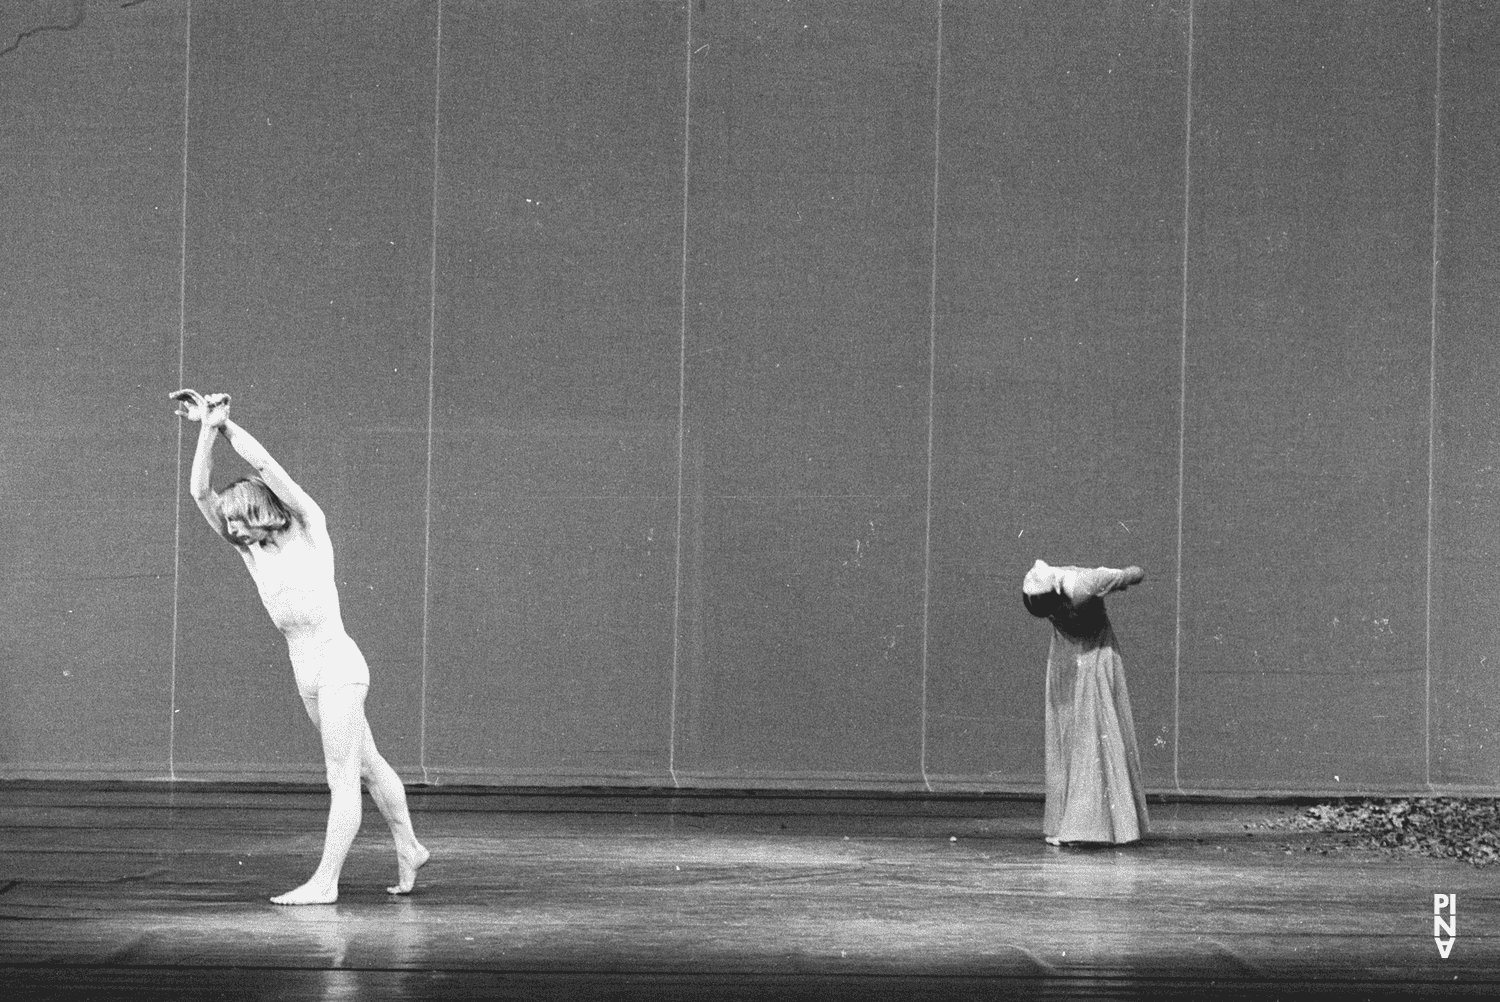 Dominique Mercy and Malou Airaudo in “Orpheus und Eurydike” by Pina Bausch